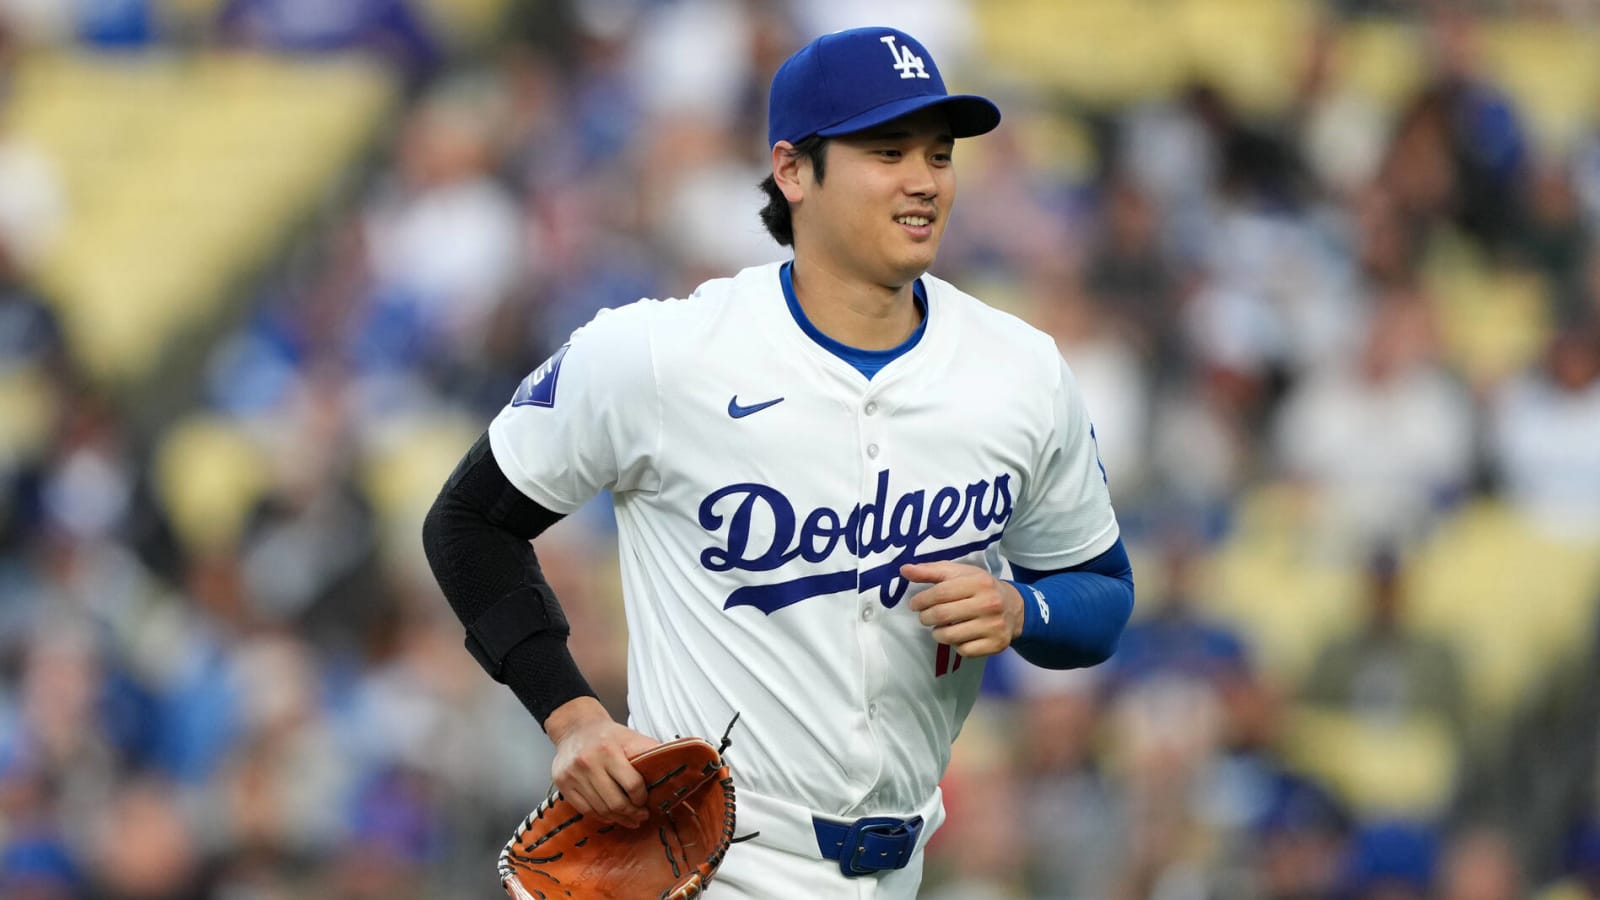 Los Angeles gives this Dodgers superstar his own holiday